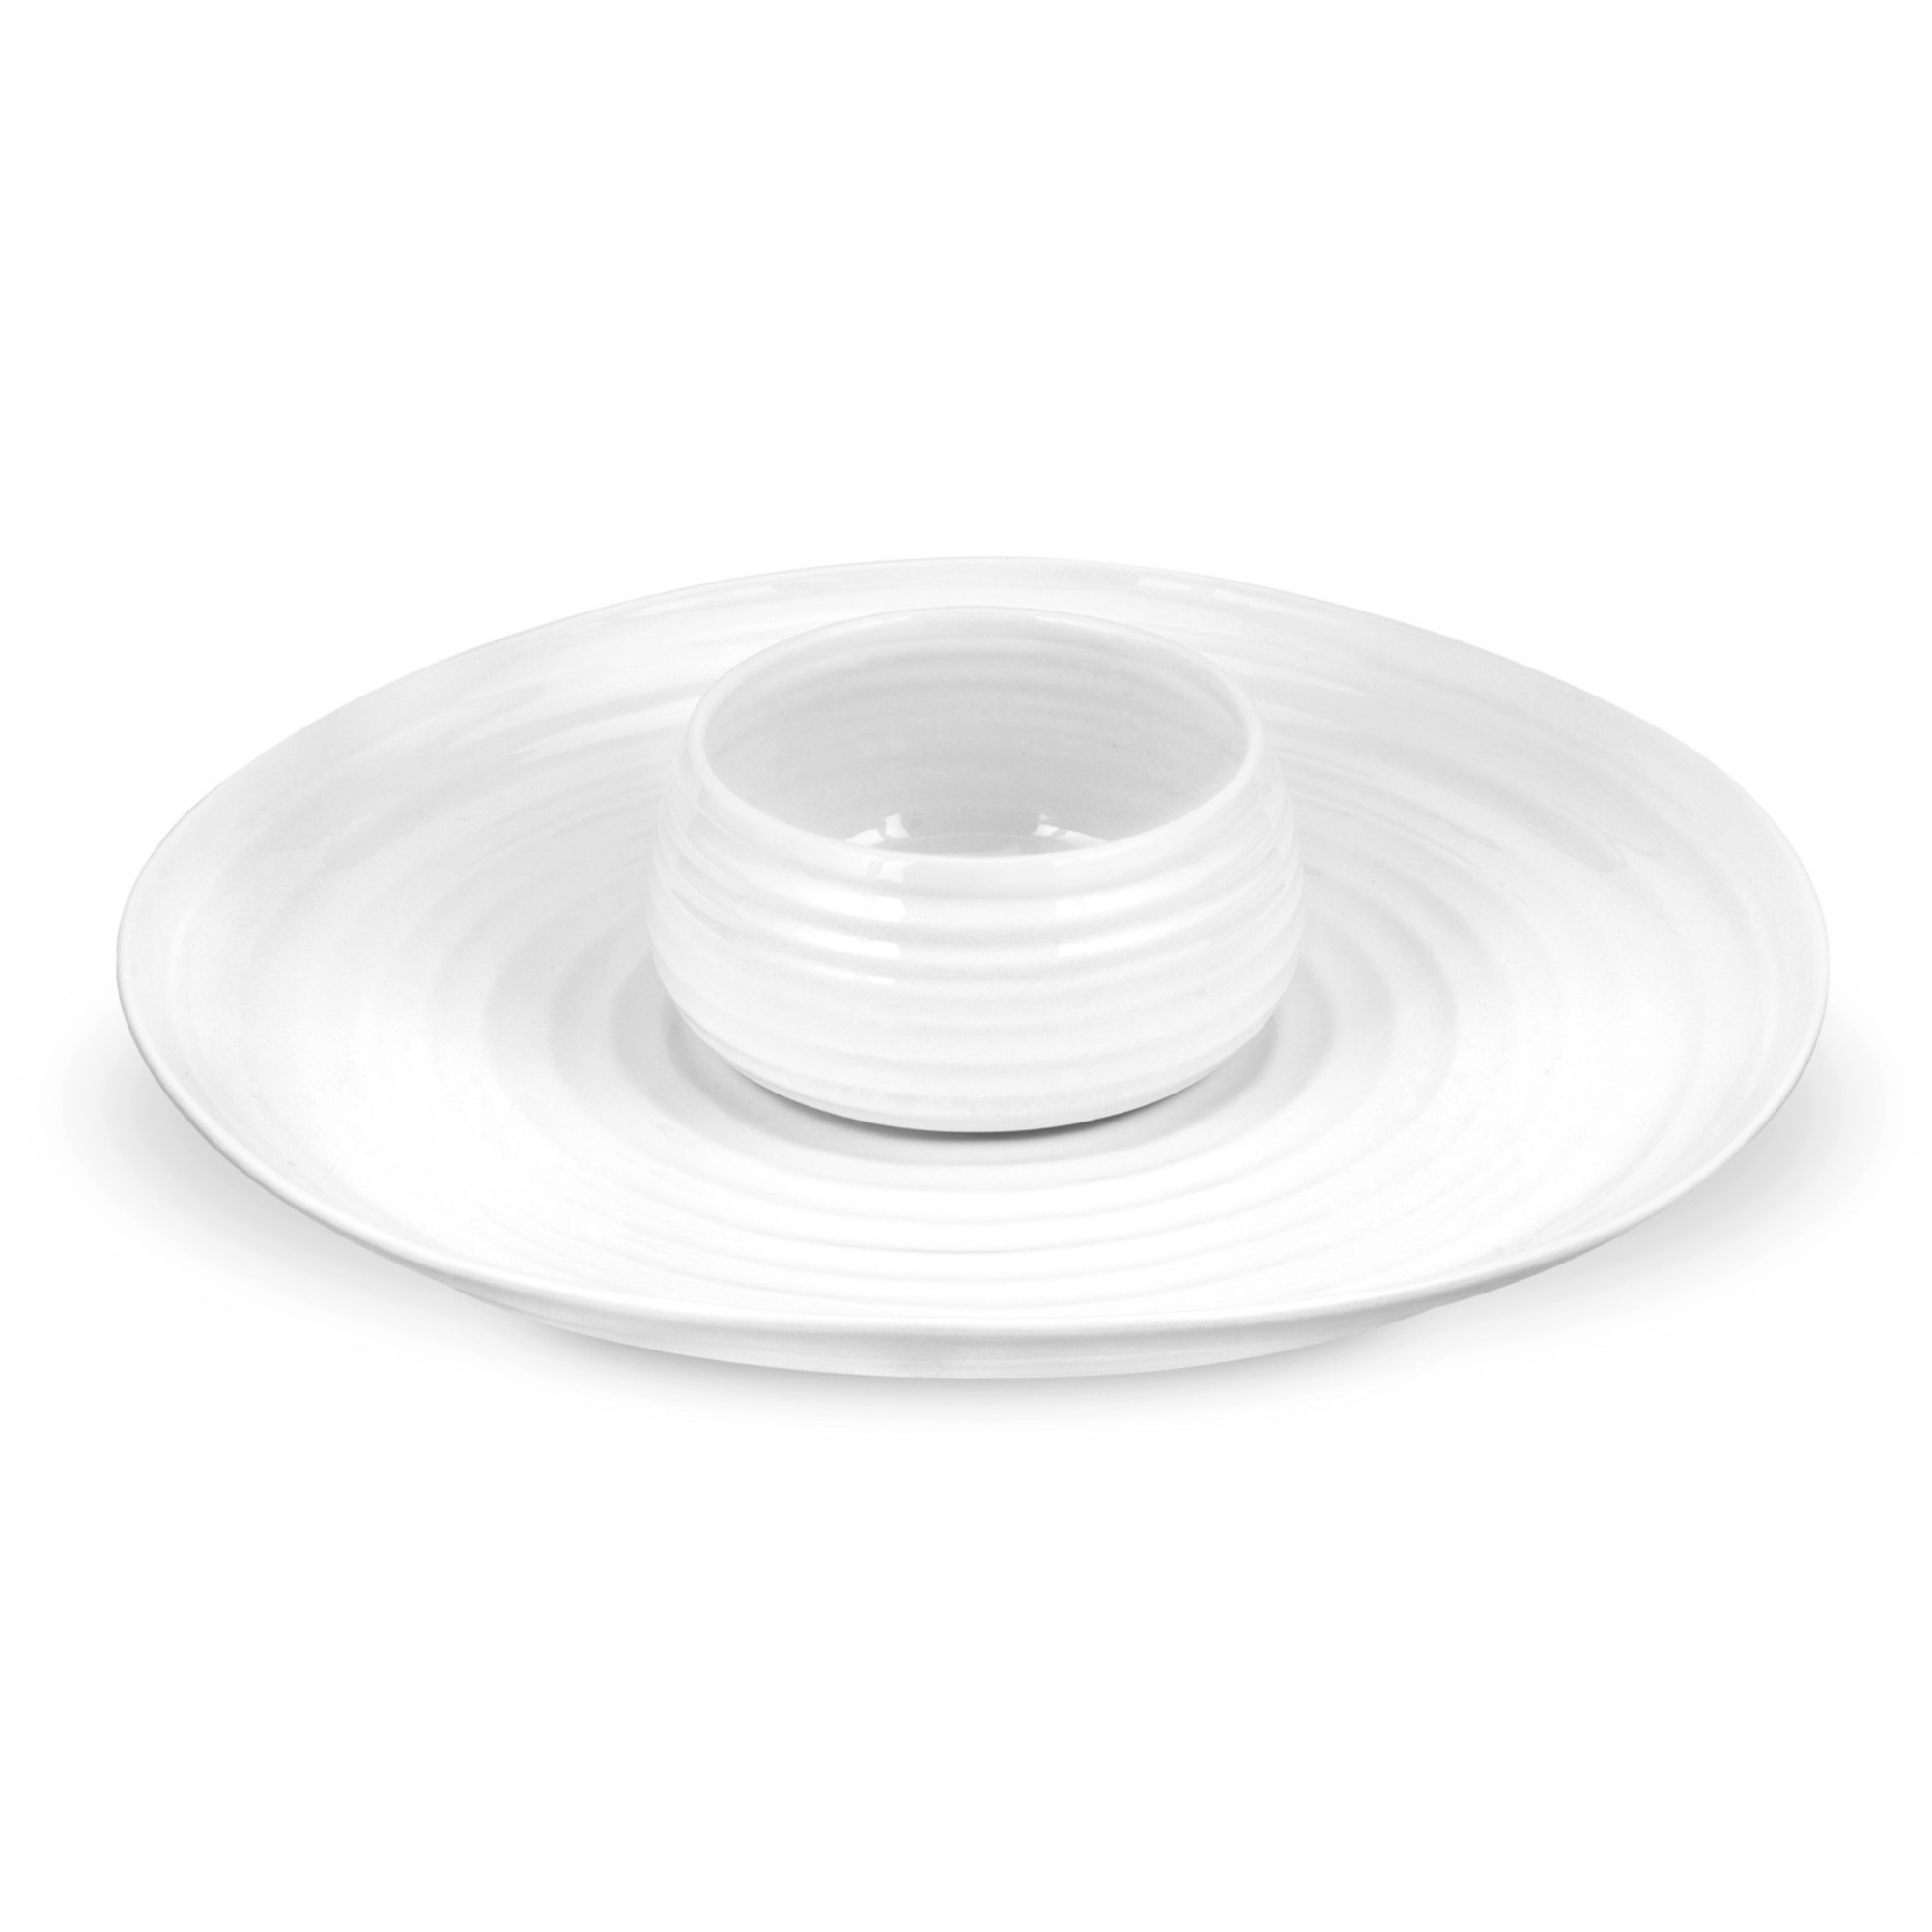 Sophie Conran Cereal Bowl White - Jill's Table